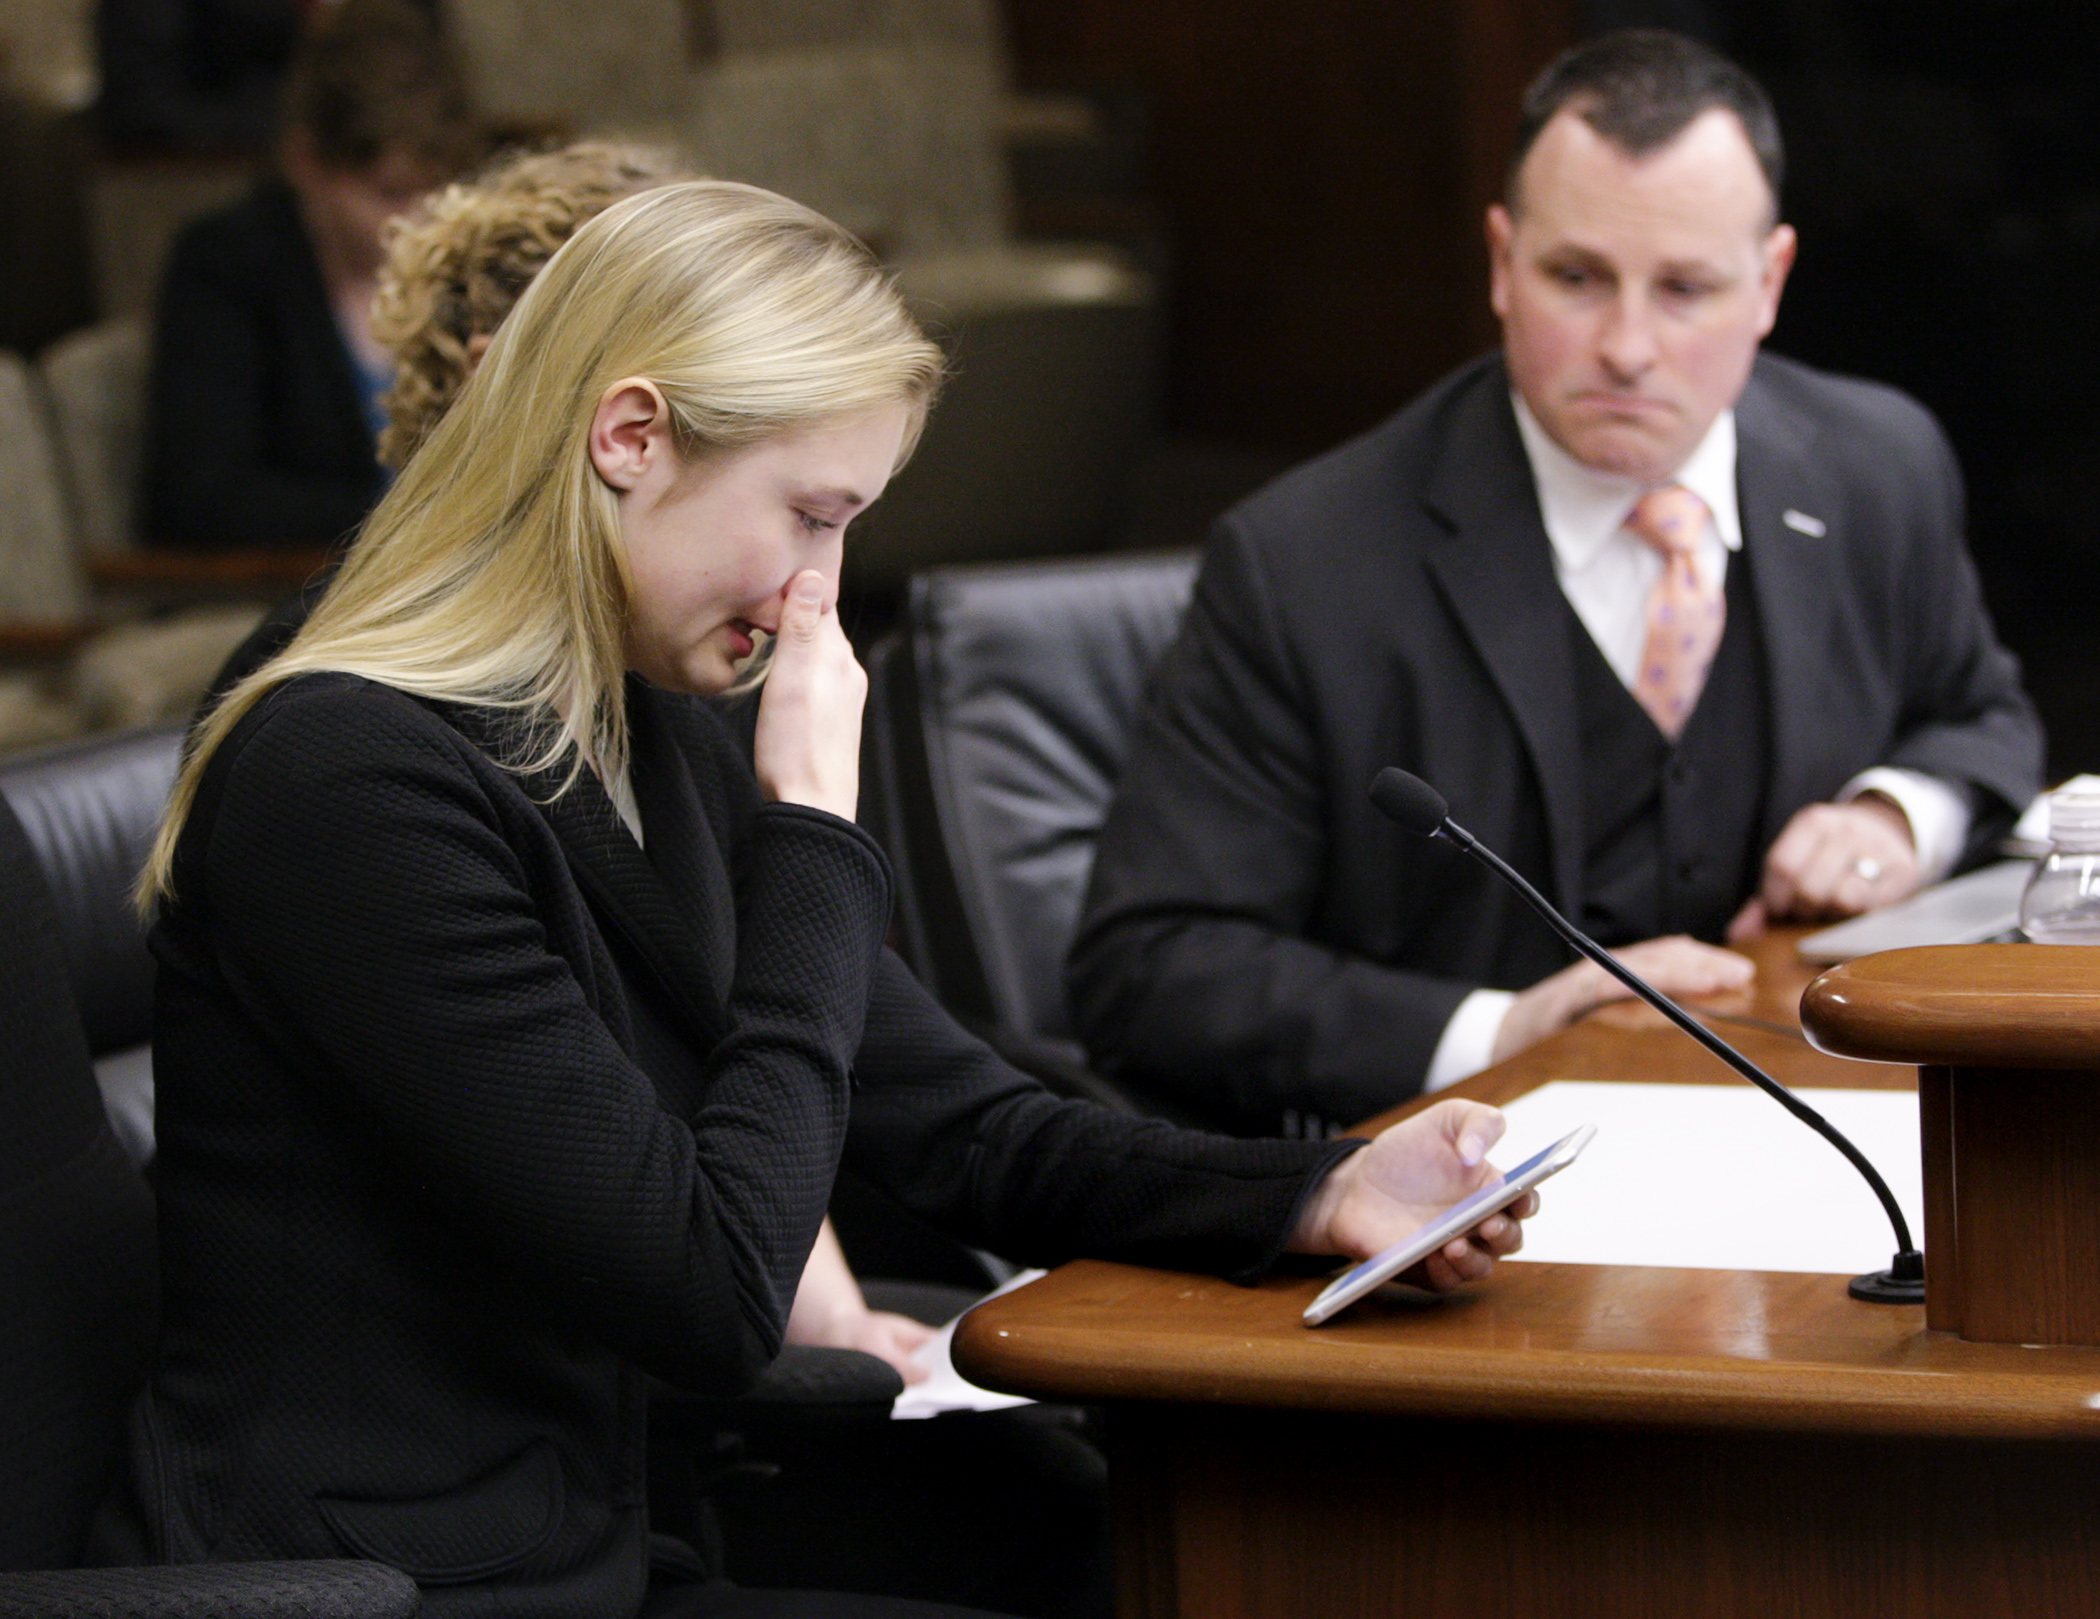 Elizabeth Williams, of Prior Lake, provides the House Public Safety and Crime Prevention Policy and Finance Committee with emotional testimony March 29, about her experience as a victim of “revenge porn.” Photo by Paul Battaglia